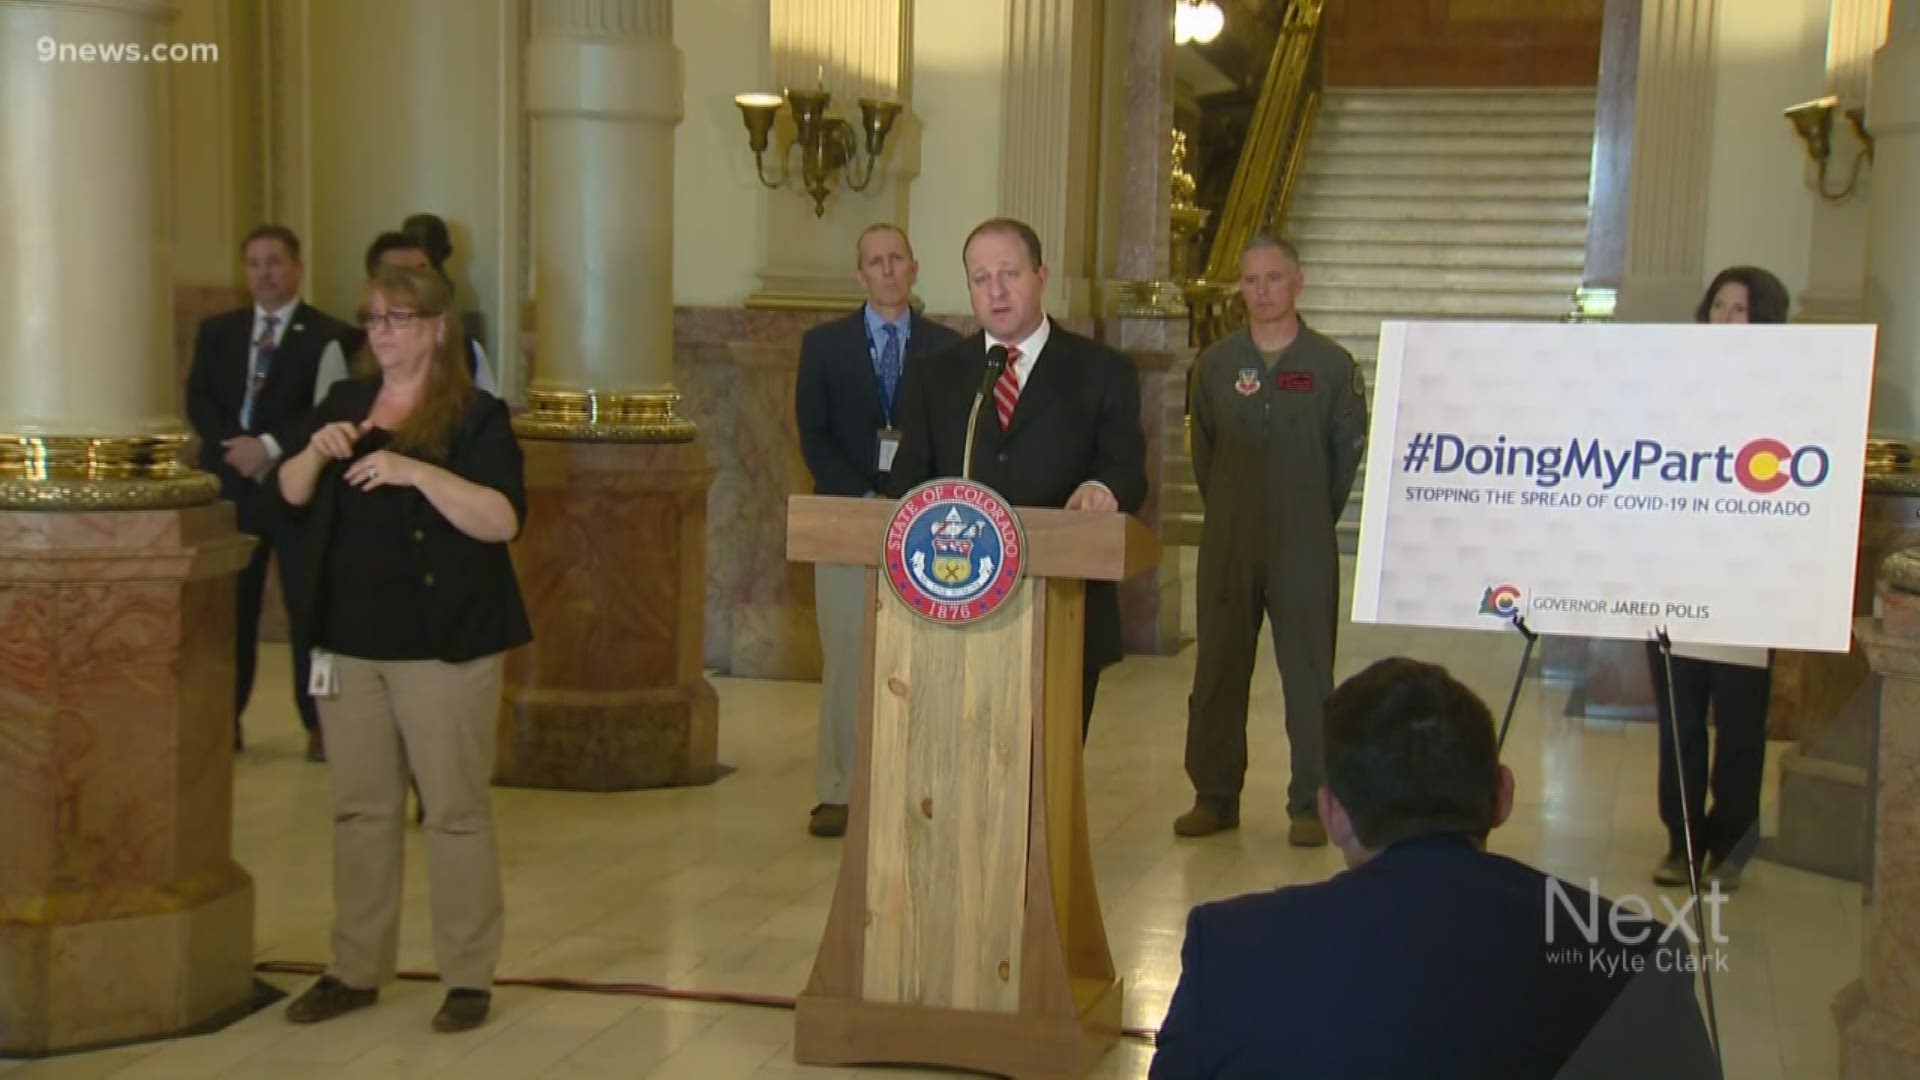 Colorado's Gov. Jared Polis also said bars and restaurants across the state will offer takeout and delivery only for 30 days because of coronavirus.